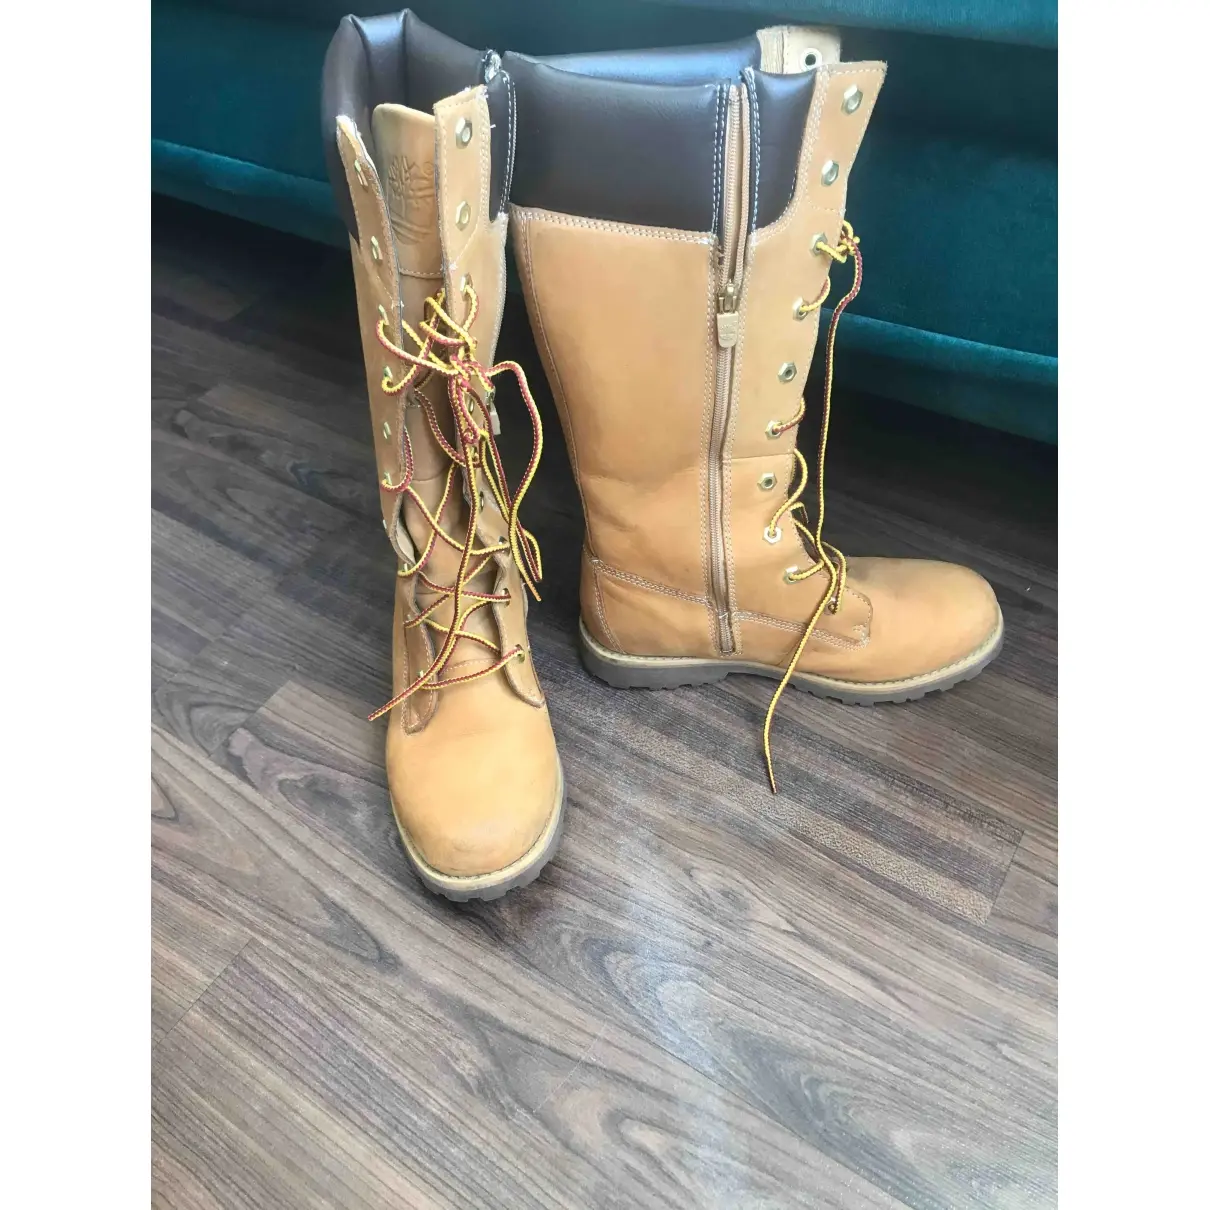 Timberland Leather snow boots for sale